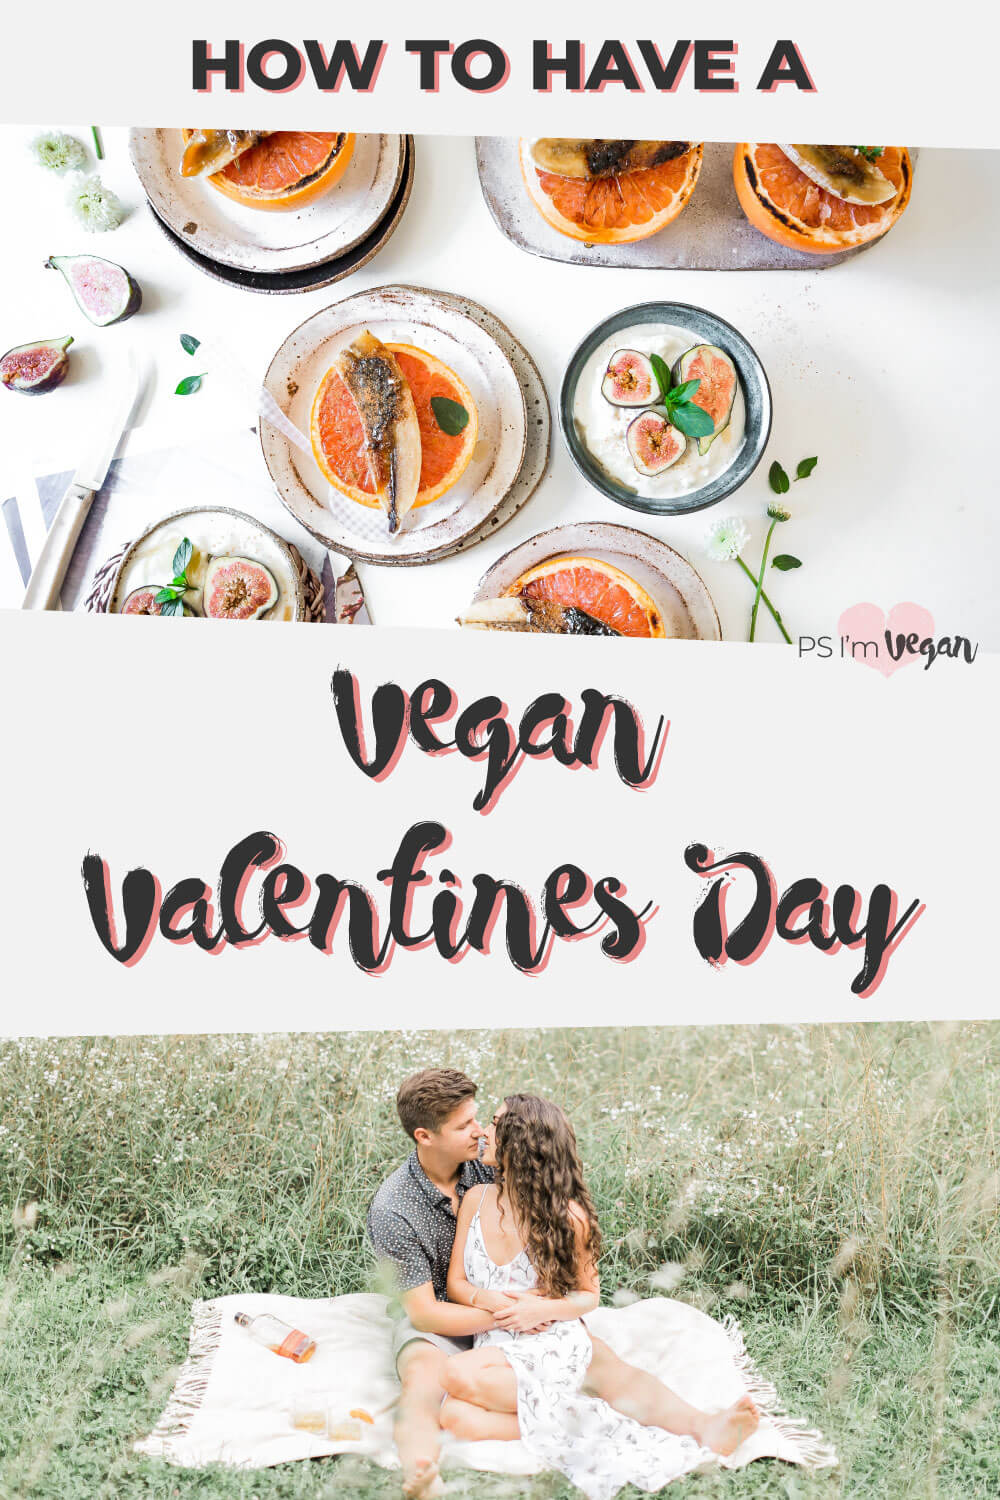 Need romantic Valentines Day ideas? We have collated easy vegan Valentines Day treats, gift ideas, dinner and cake recipes, date ideas, picnic ideas, plus a list of vegan chocolates and champagnes. So you can have the best vegan V Day ever! 💋🌱💕
#vegan #valentinesday #romantic #PSIV #vegangifts #shop